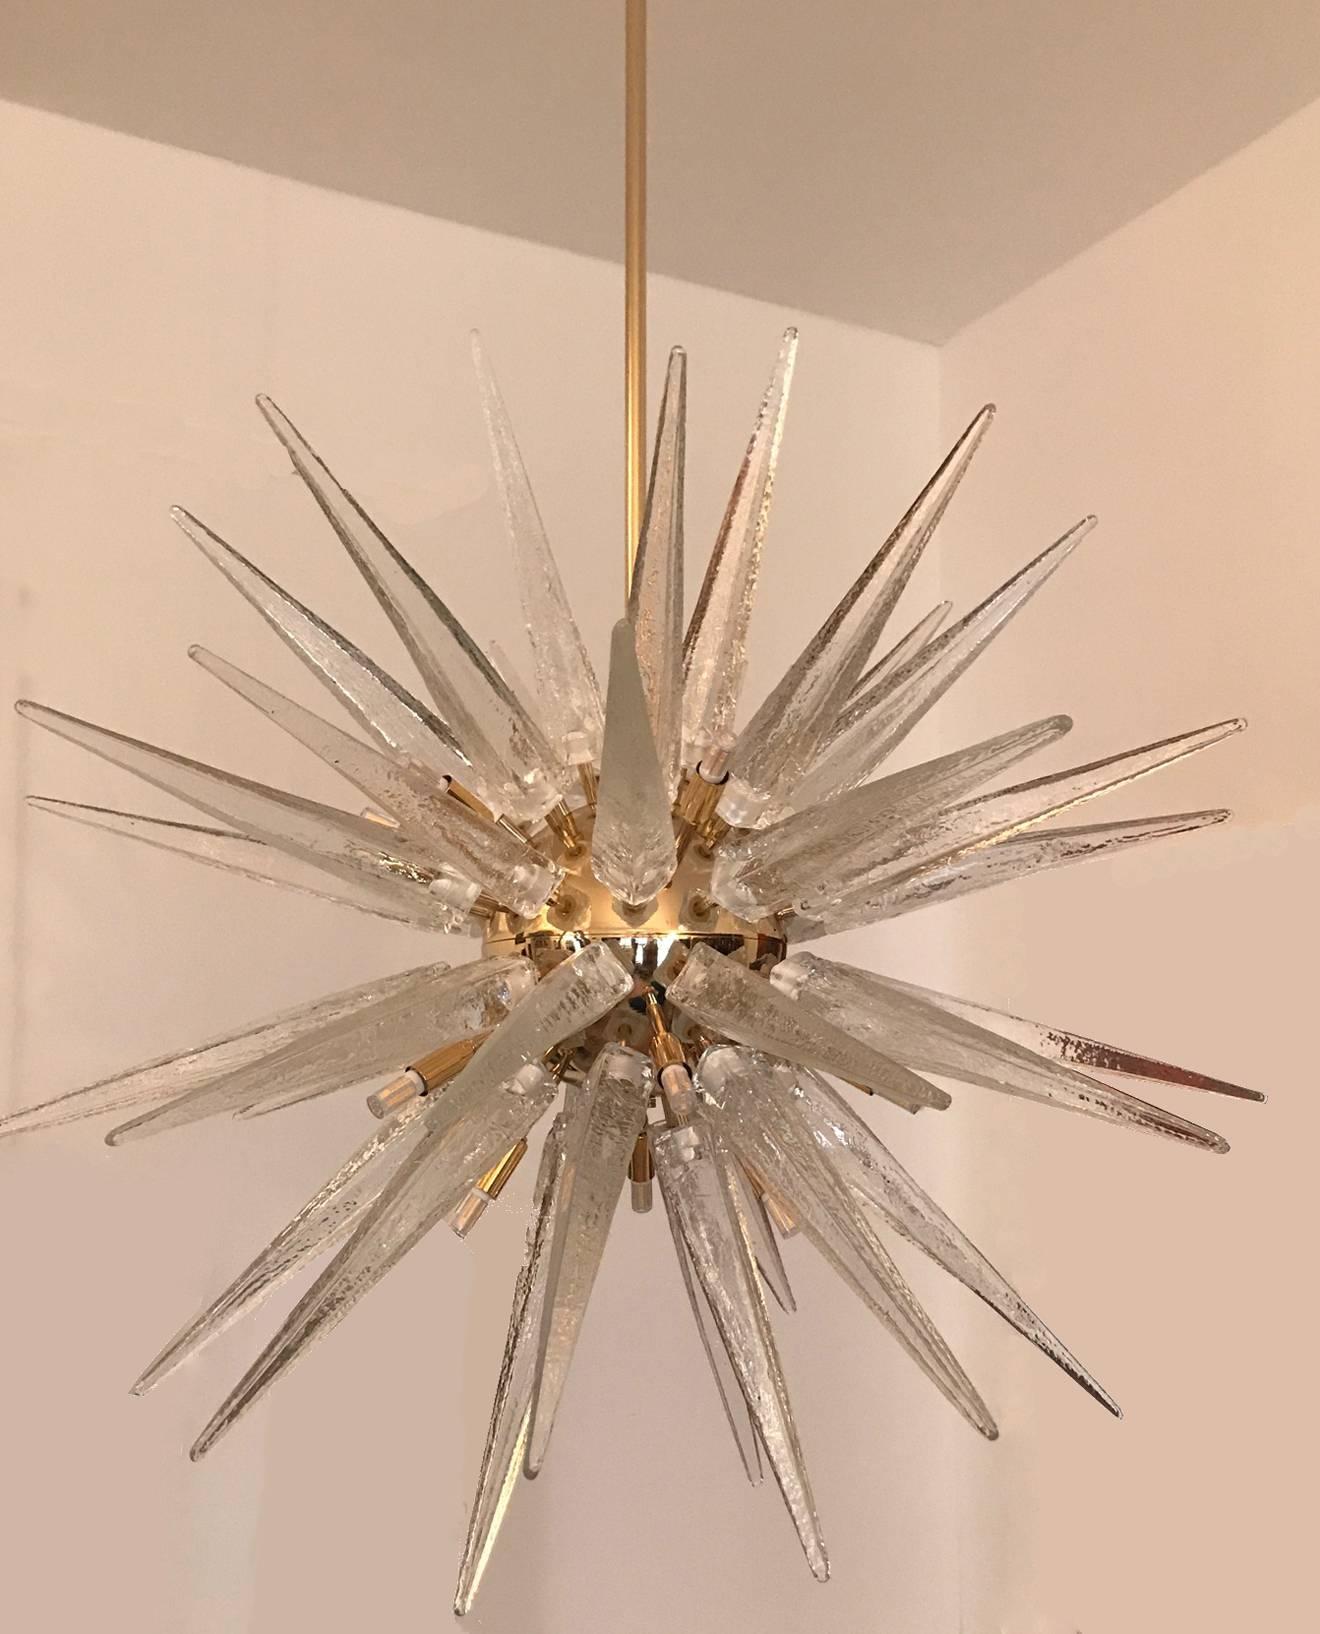 Gold plated sputnik chandelier with hand blown Murano glass spikes.
18 G9 exposed lights, with 50 glass spikes on stems.
 Please note that length of stem can be adjusted for a shorter overall height.